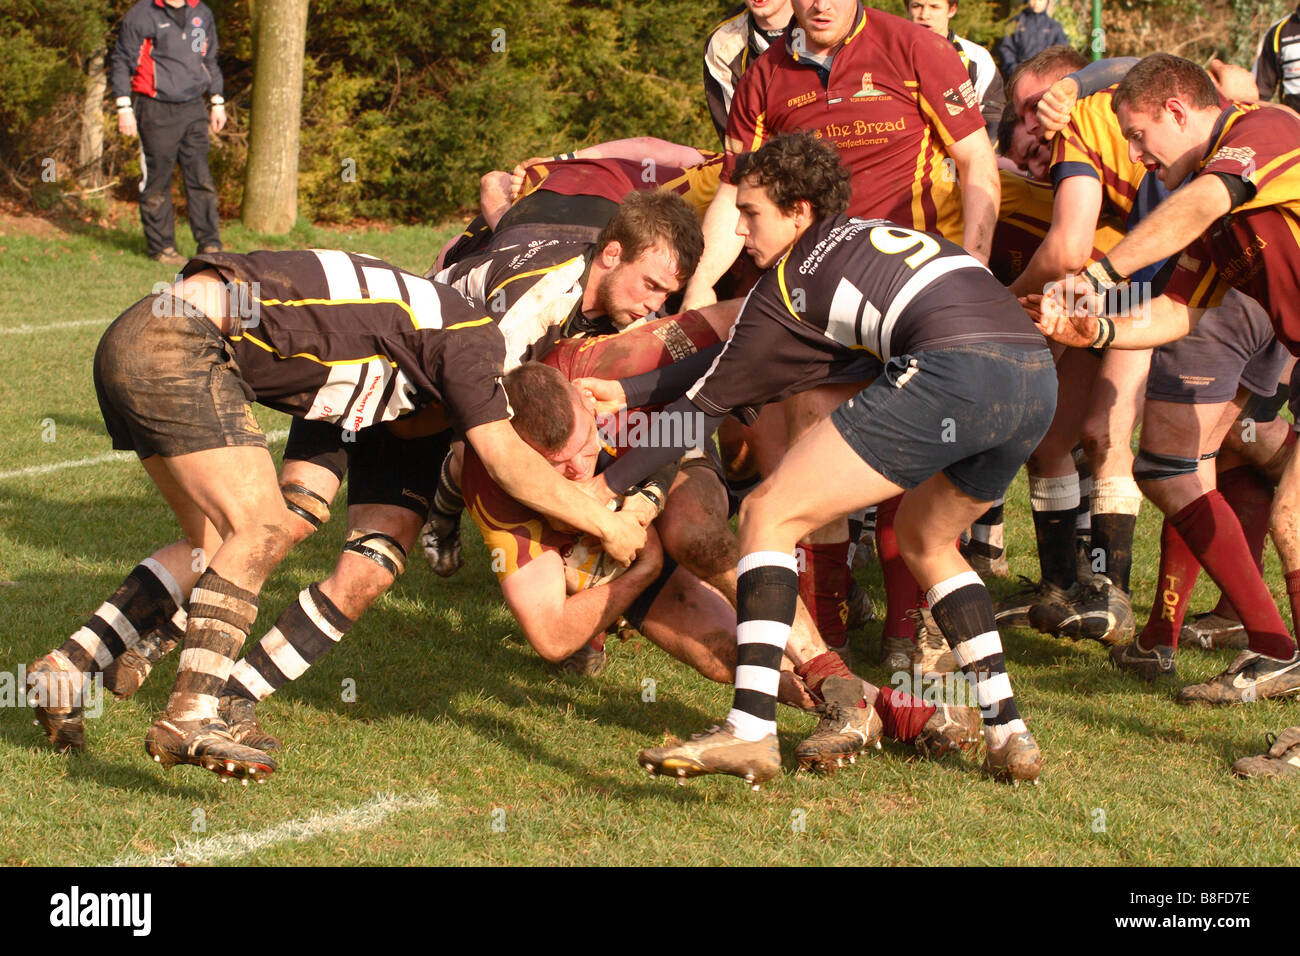 Sport rugby game match desperate tackle by the defence just in front of their own try line Stock Photo